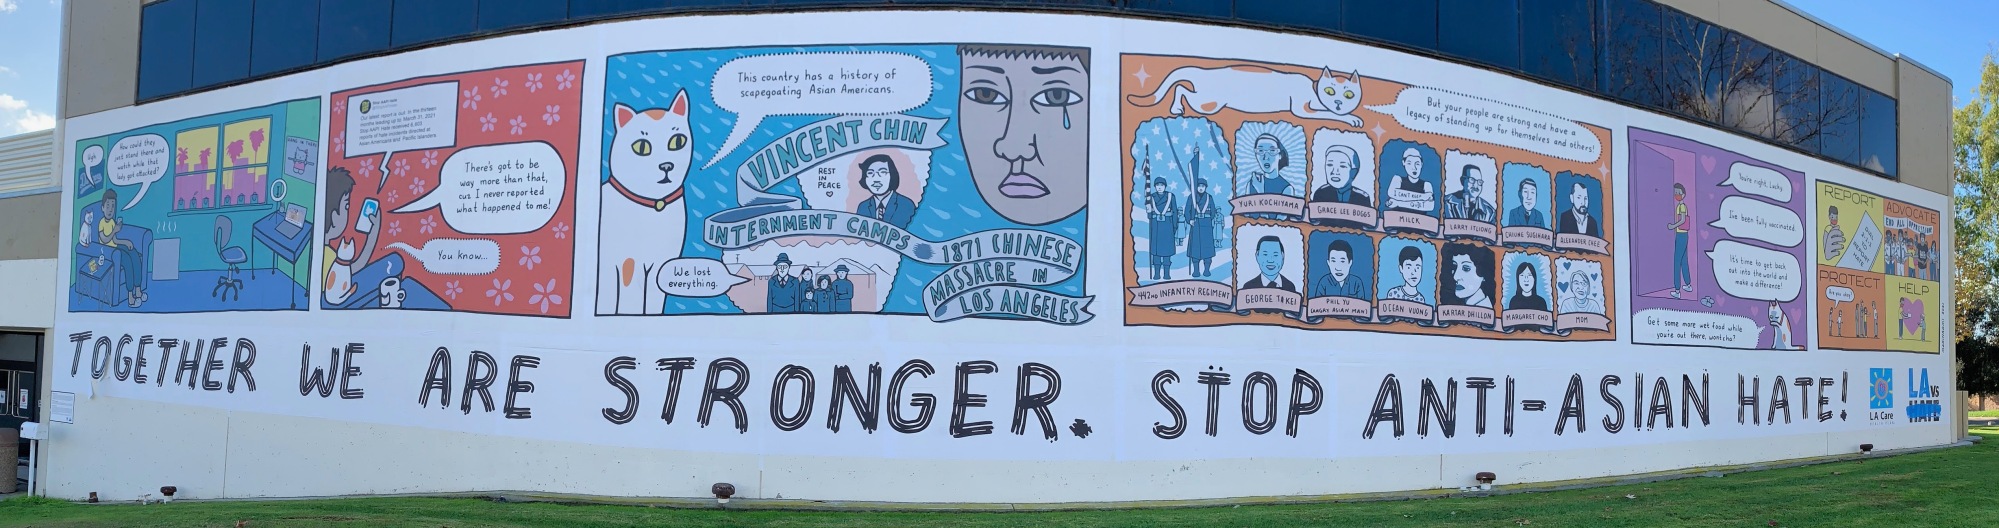 Comic mural with words at bottom: "Together we are stronger, Stop Anti-Asian Hate!" Comic panels depict concern about anti-Asian hate, some notable anti-Asian discrimination and violence, and examples of Asian American activists. The last panel describes action steps: protect, report to 2-1-1, advocate, and help.